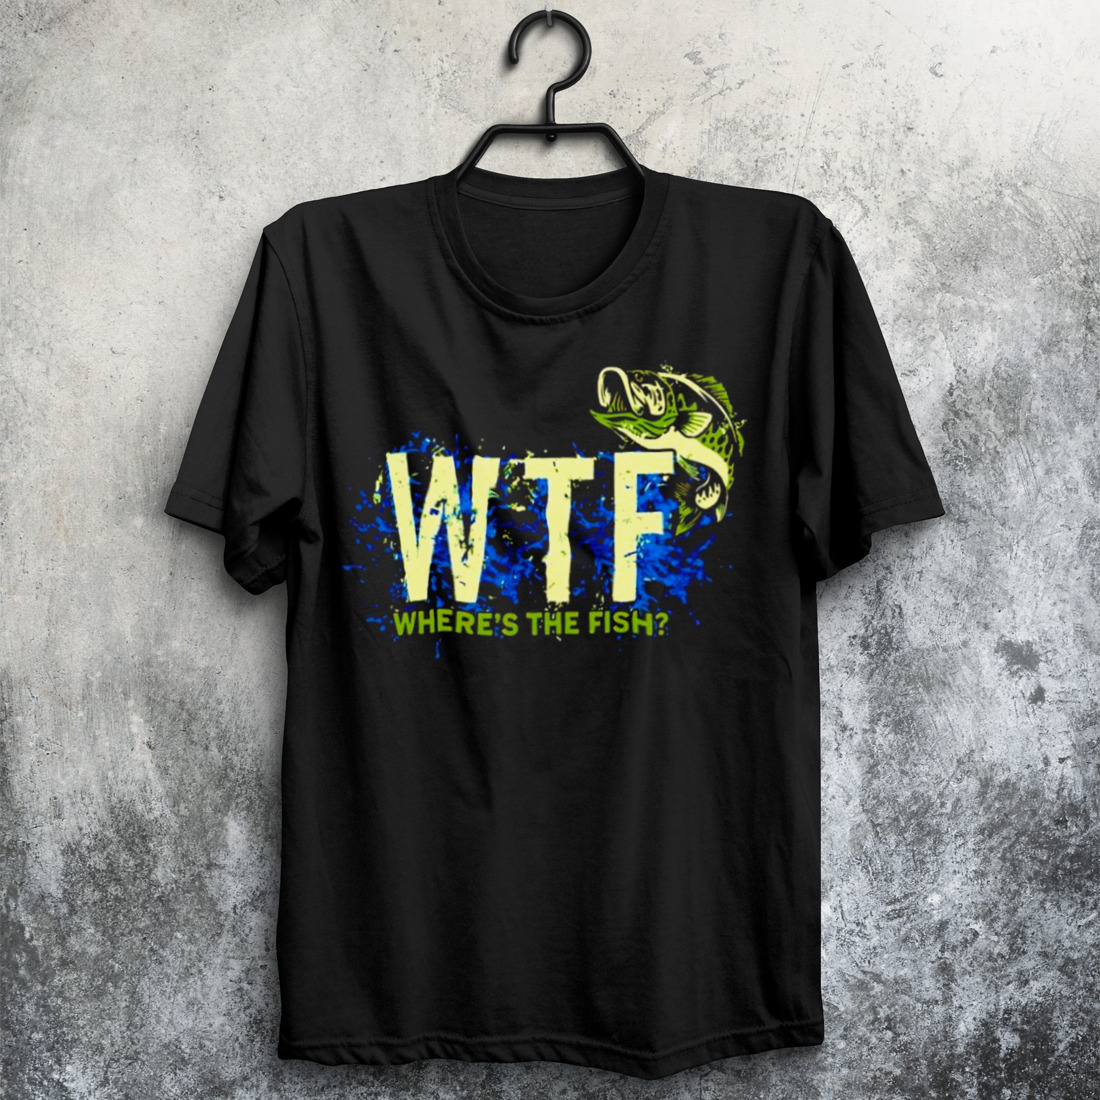 Where’s the fish WTF shirt